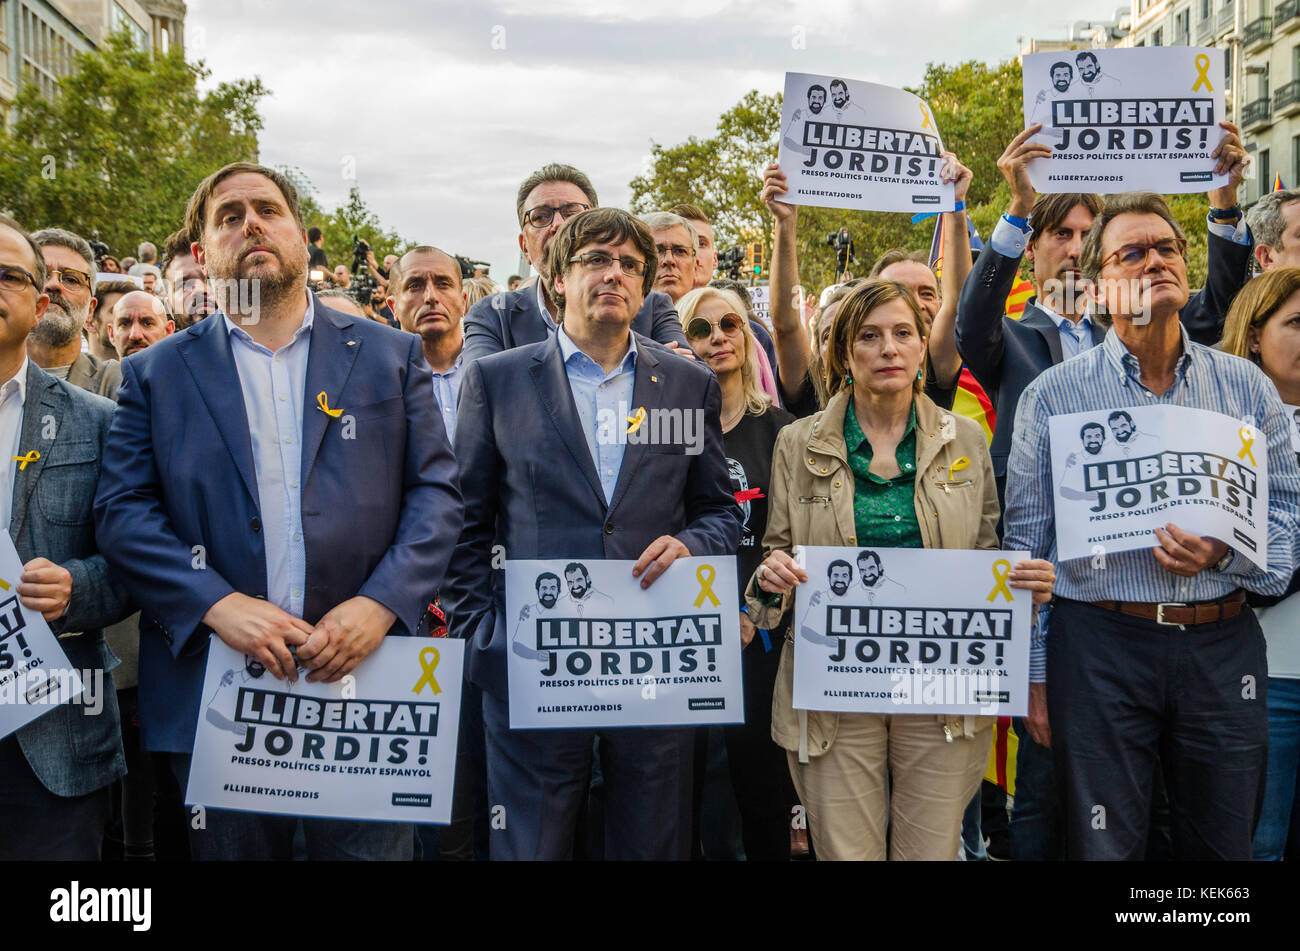 Barcelona, Spain. 21st Oct, 2017. From the left, Oriol Junqueras, Carles Puigdemont, Carme Forcadell and Artud Mas, occupy the first row of the demonstration in front of the stage. About 450,000 people have been focused to support the Government and the Catalan institutions in the Paseo de Gracia in Barcelona in an act of solidarity by Jordi Cuixart and Jordi Sanchez arrested for sedition. Credit: ZUMA Press, Inc./Alamy Live News Stock Photo